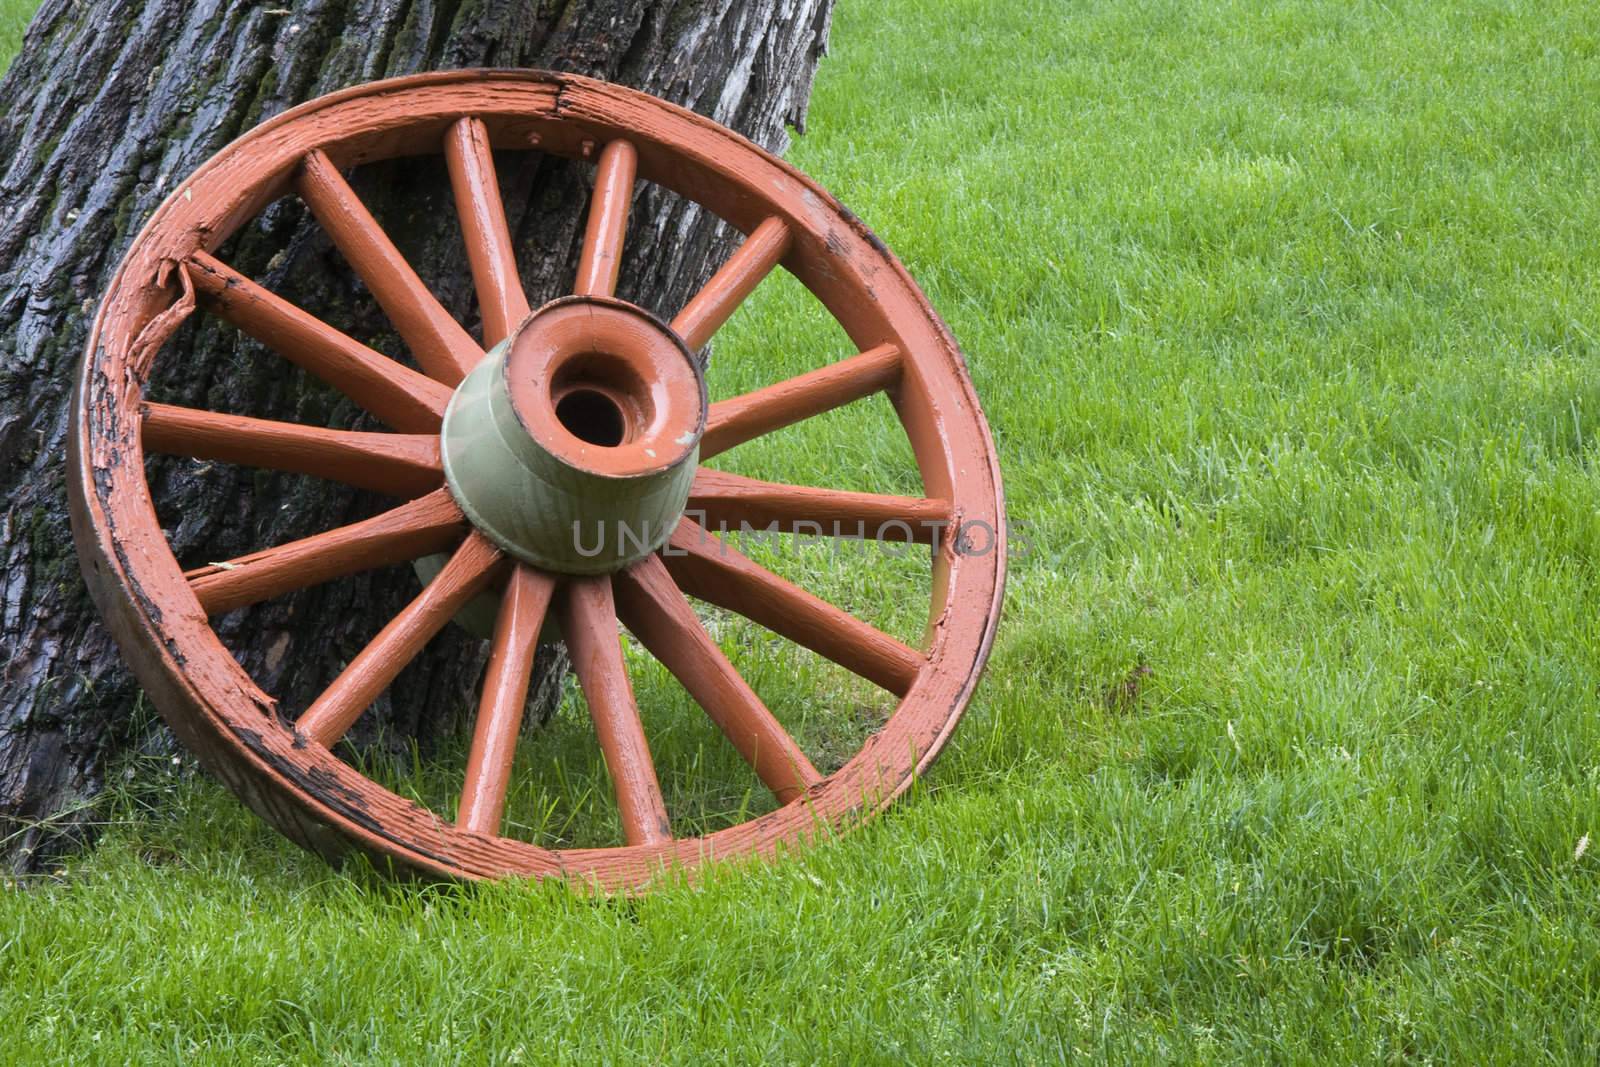 old, wheathered wagon wheel painted orange against green grass in rain